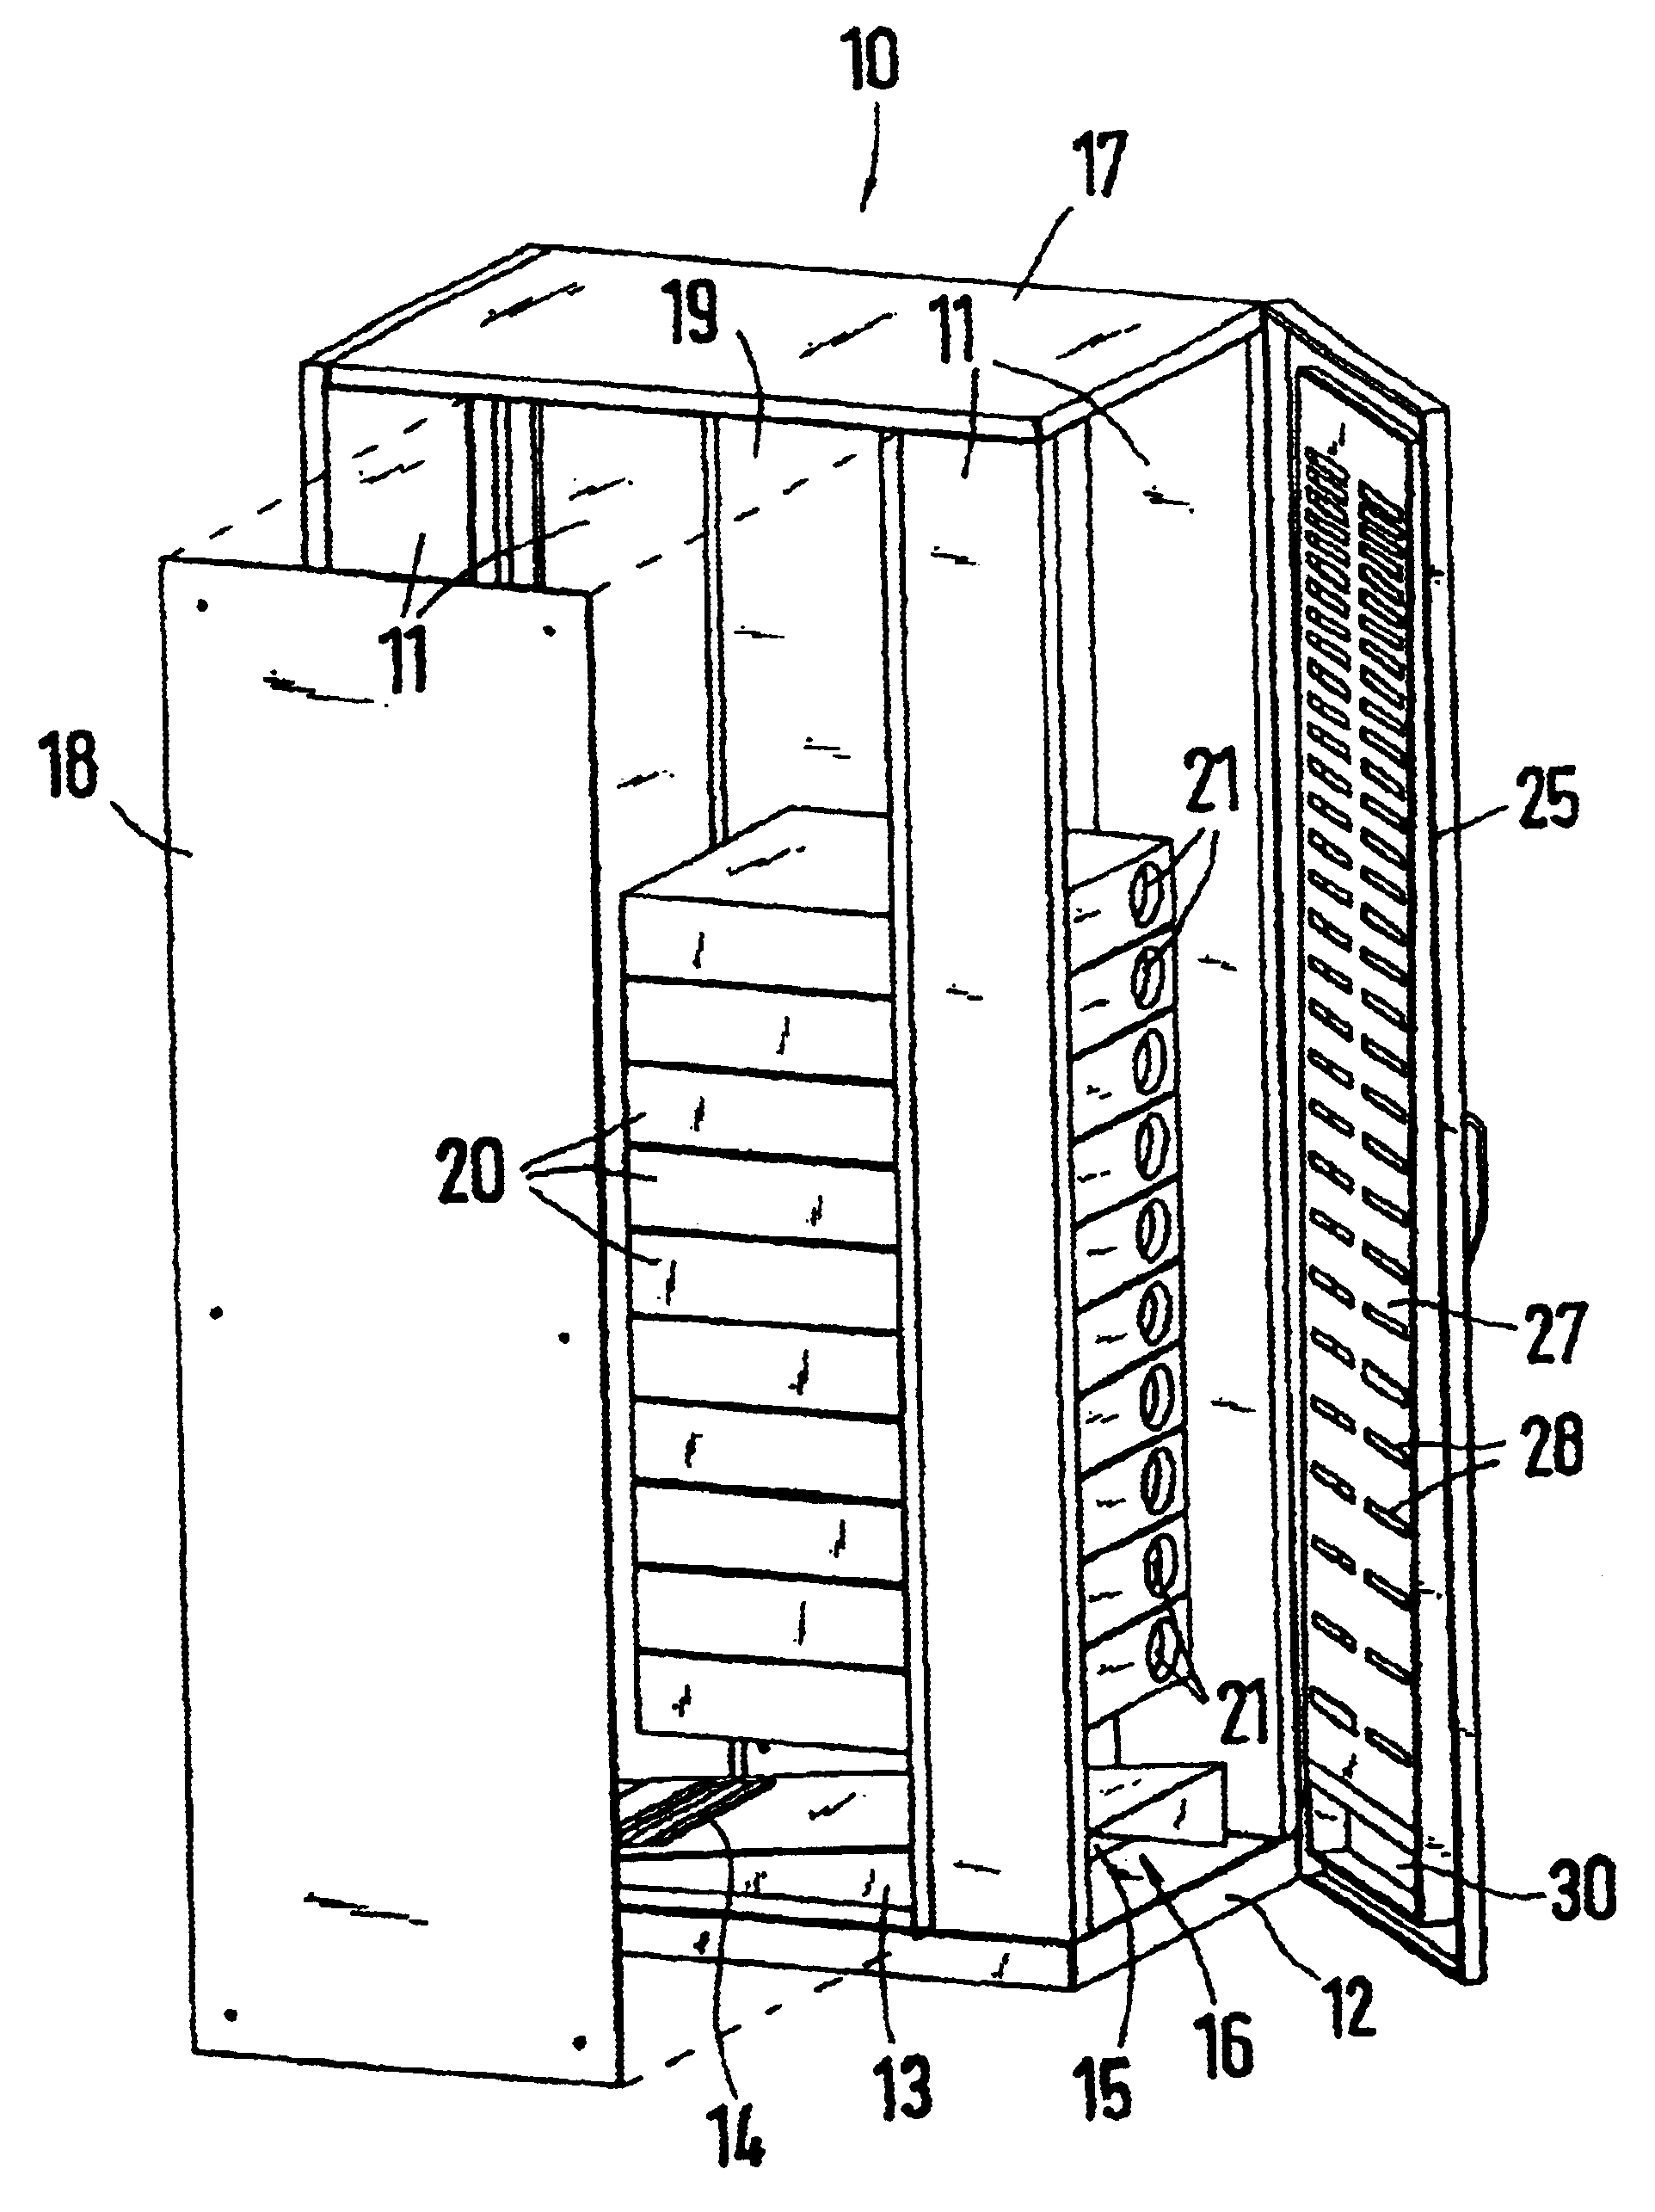 Switchgear cabinet with at least one cabinet door and a fan-assisted air circulation on an interior